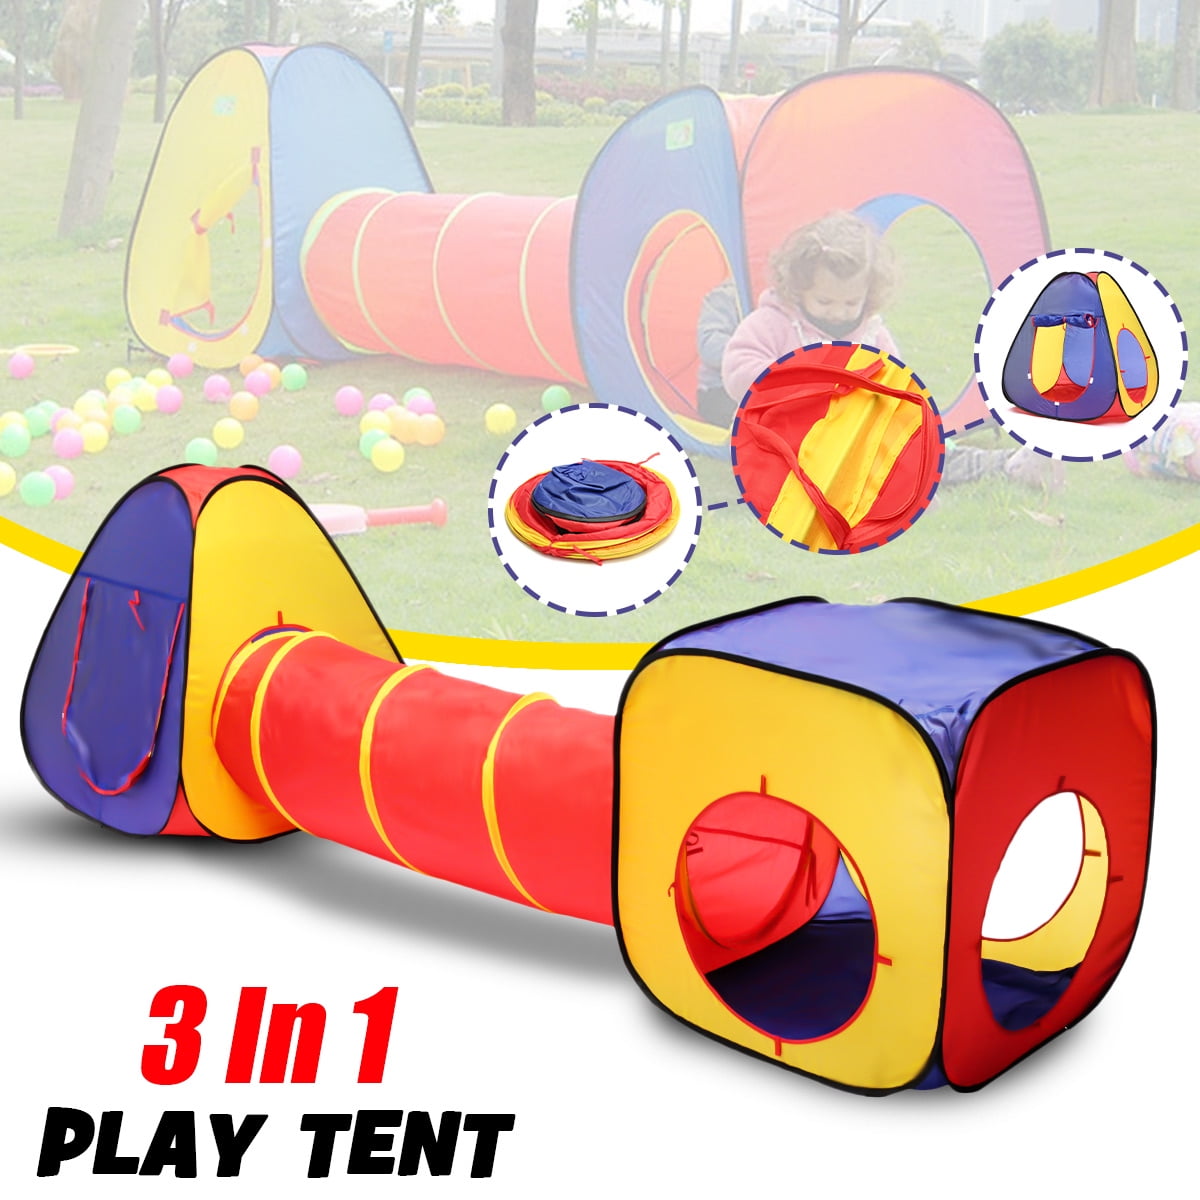 3in1 Portable Children Kids Baby Play Tent Tunnel Ball Pit Playhouse Pop Up Tent 